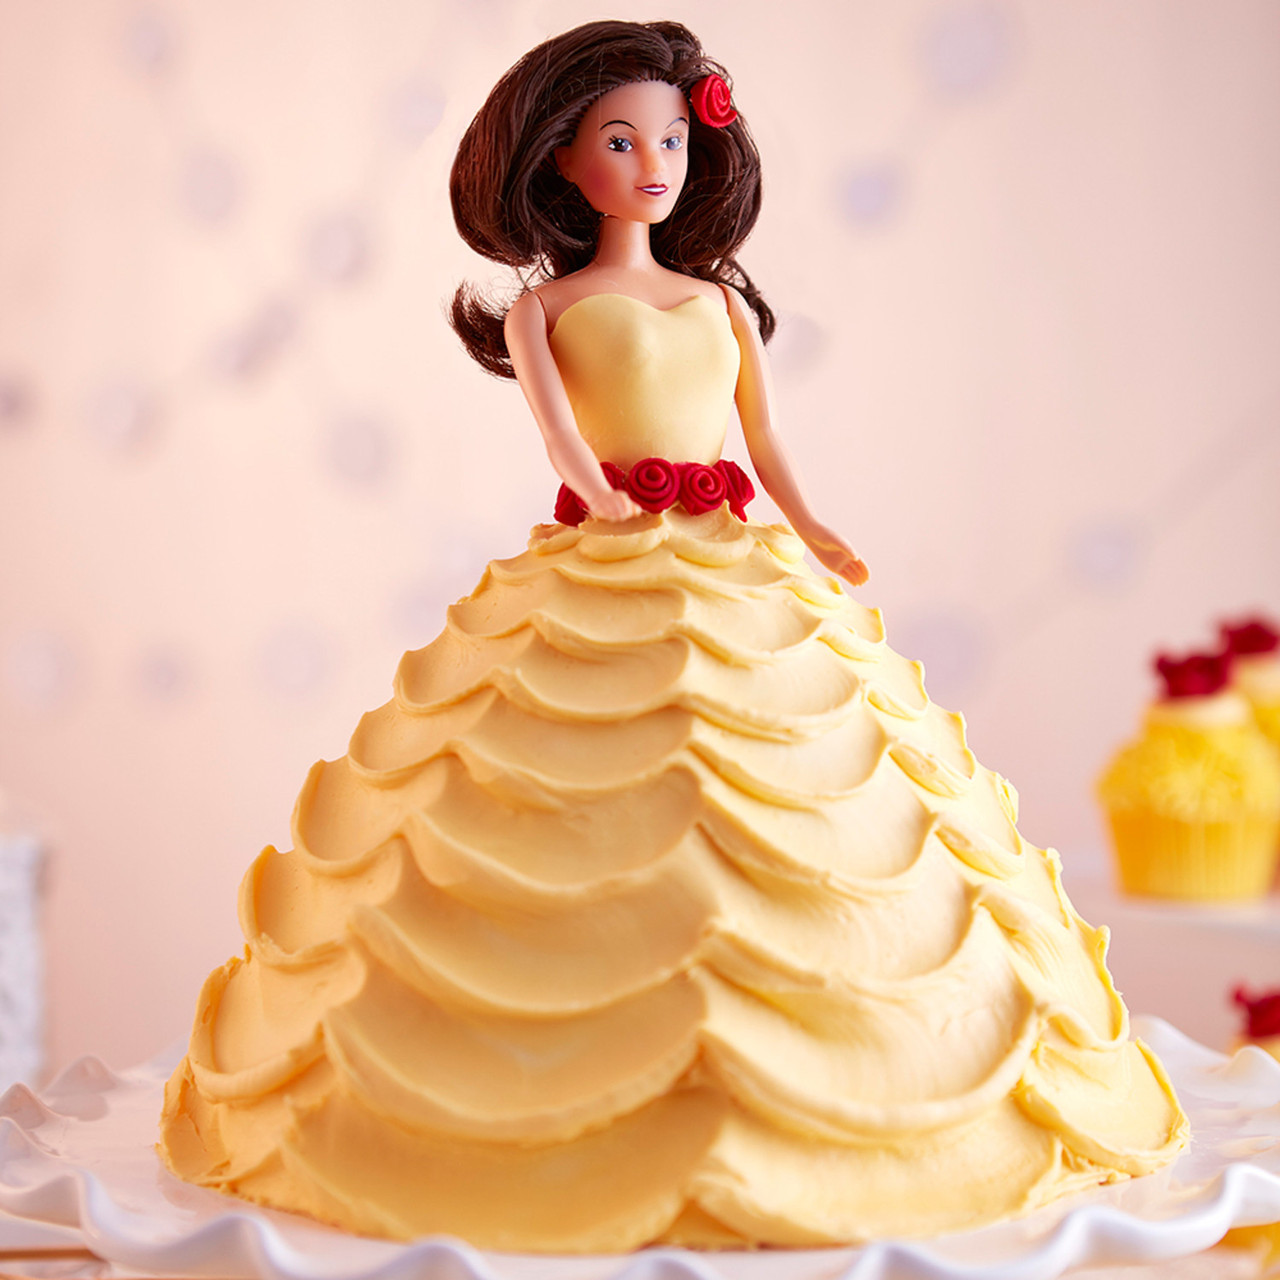 Fairy doll cake - Cookidoo® – the official Thermomix® recipe platform